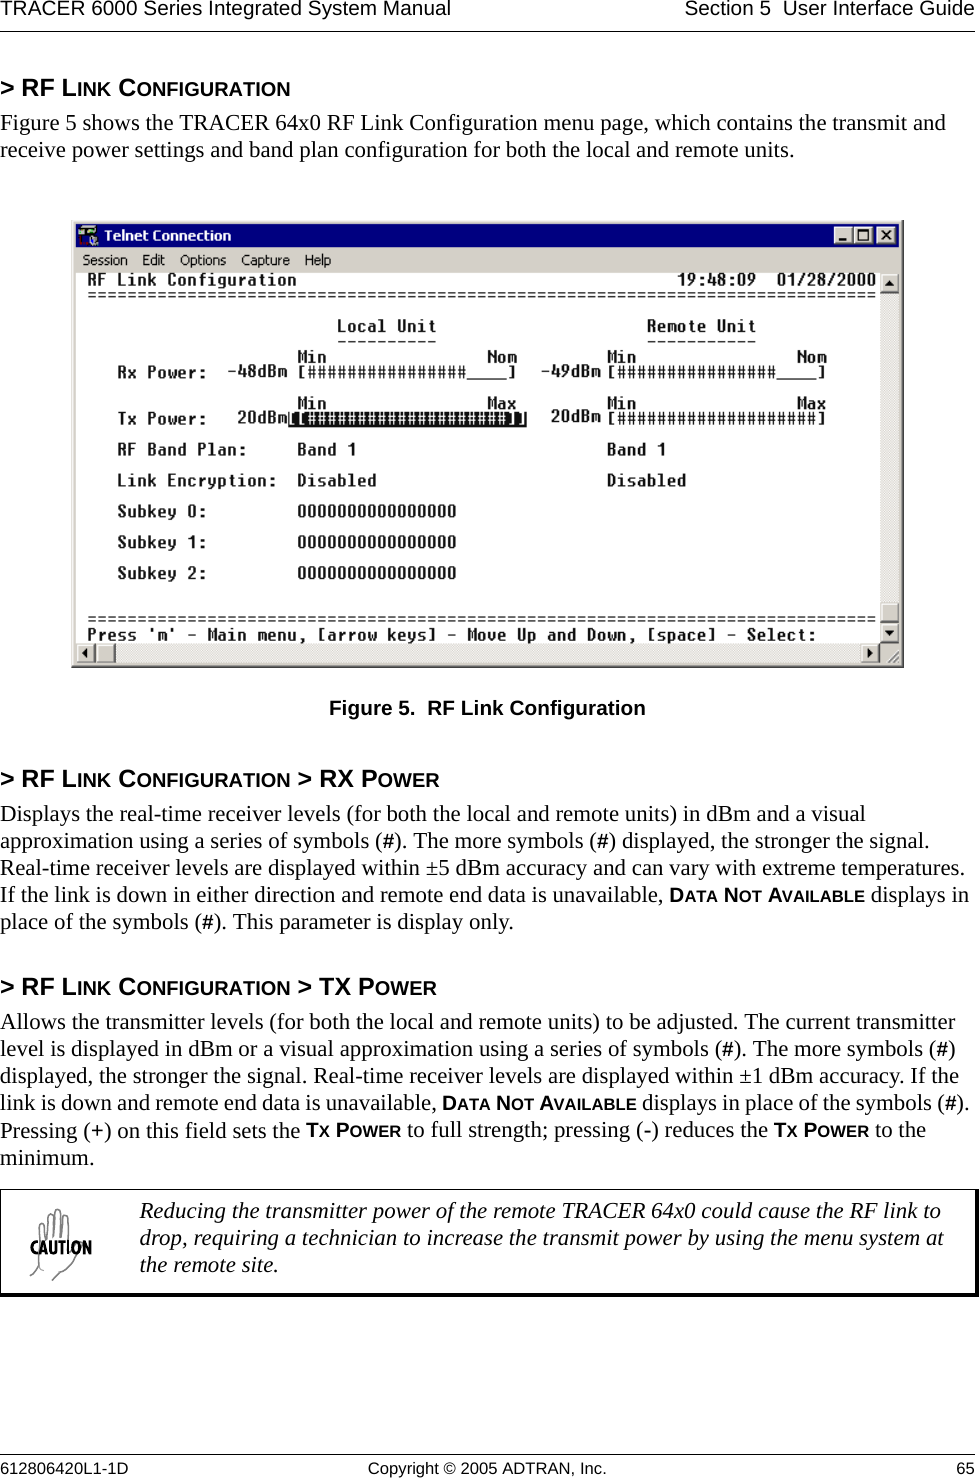 TRACER 6000 Series Integrated System Manual Section 5  User Interface Guide612806420L1-1D Copyright © 2005 ADTRAN, Inc. 65&gt; RF LINK CONFIGURATIONFigure 5 shows the TRACER 64x0 RF Link Configuration menu page, which contains the transmit and receive power settings and band plan configuration for both the local and remote units.Figure 5.  RF Link Configuration&gt; RF LINK CONFIGURATION &gt; RX POWERDisplays the real-time receiver levels (for both the local and remote units) in dBm and a visual approximation using a series of symbols (#). The more symbols (#) displayed, the stronger the signal. Real-time receiver levels are displayed within ±5 dBm accuracy and can vary with extreme temperatures. If the link is down in either direction and remote end data is unavailable, DATA NOT AVAILABLE displays in place of the symbols (#). This parameter is display only. &gt; RF LINK CONFIGURATION &gt; TX POWERAllows the transmitter levels (for both the local and remote units) to be adjusted. The current transmitter level is displayed in dBm or a visual approximation using a series of symbols (#). The more symbols (#) displayed, the stronger the signal. Real-time receiver levels are displayed within ±1 dBm accuracy. If the link is down and remote end data is unavailable, DATA NOT AVAILABLE displays in place of the symbols (#). Pressing (+) on this field sets the TX POWER to full strength; pressing (-) reduces the TX POWER to the minimum. Reducing the transmitter power of the remote TRACER 64x0 could cause the RF link to drop, requiring a technician to increase the transmit power by using the menu system at the remote site.